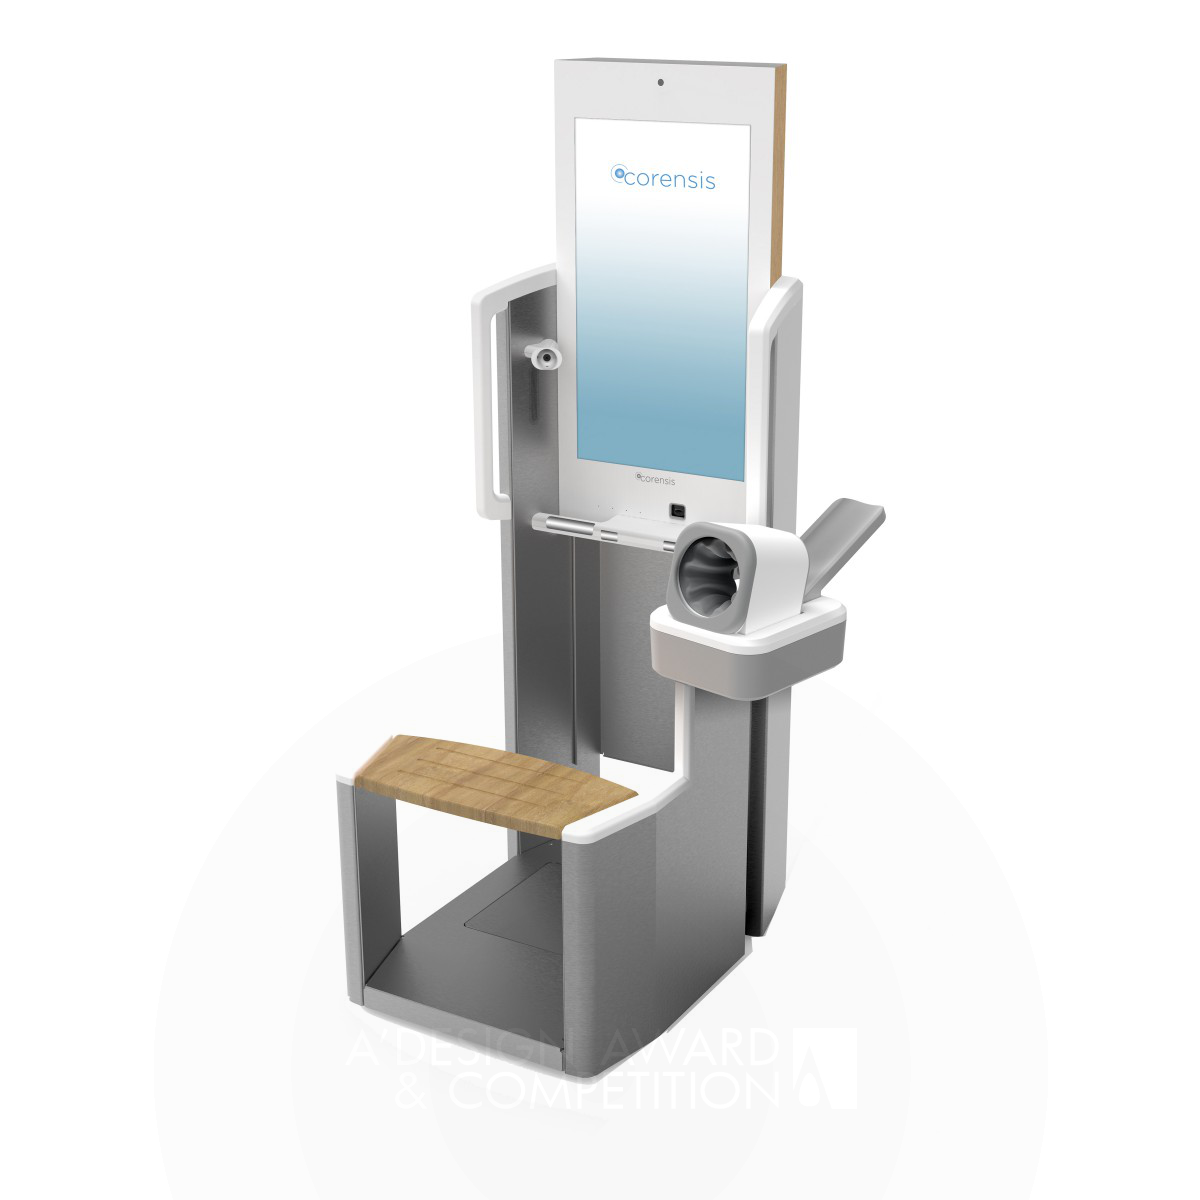 Innovative Solution for Automated Medical Measurements